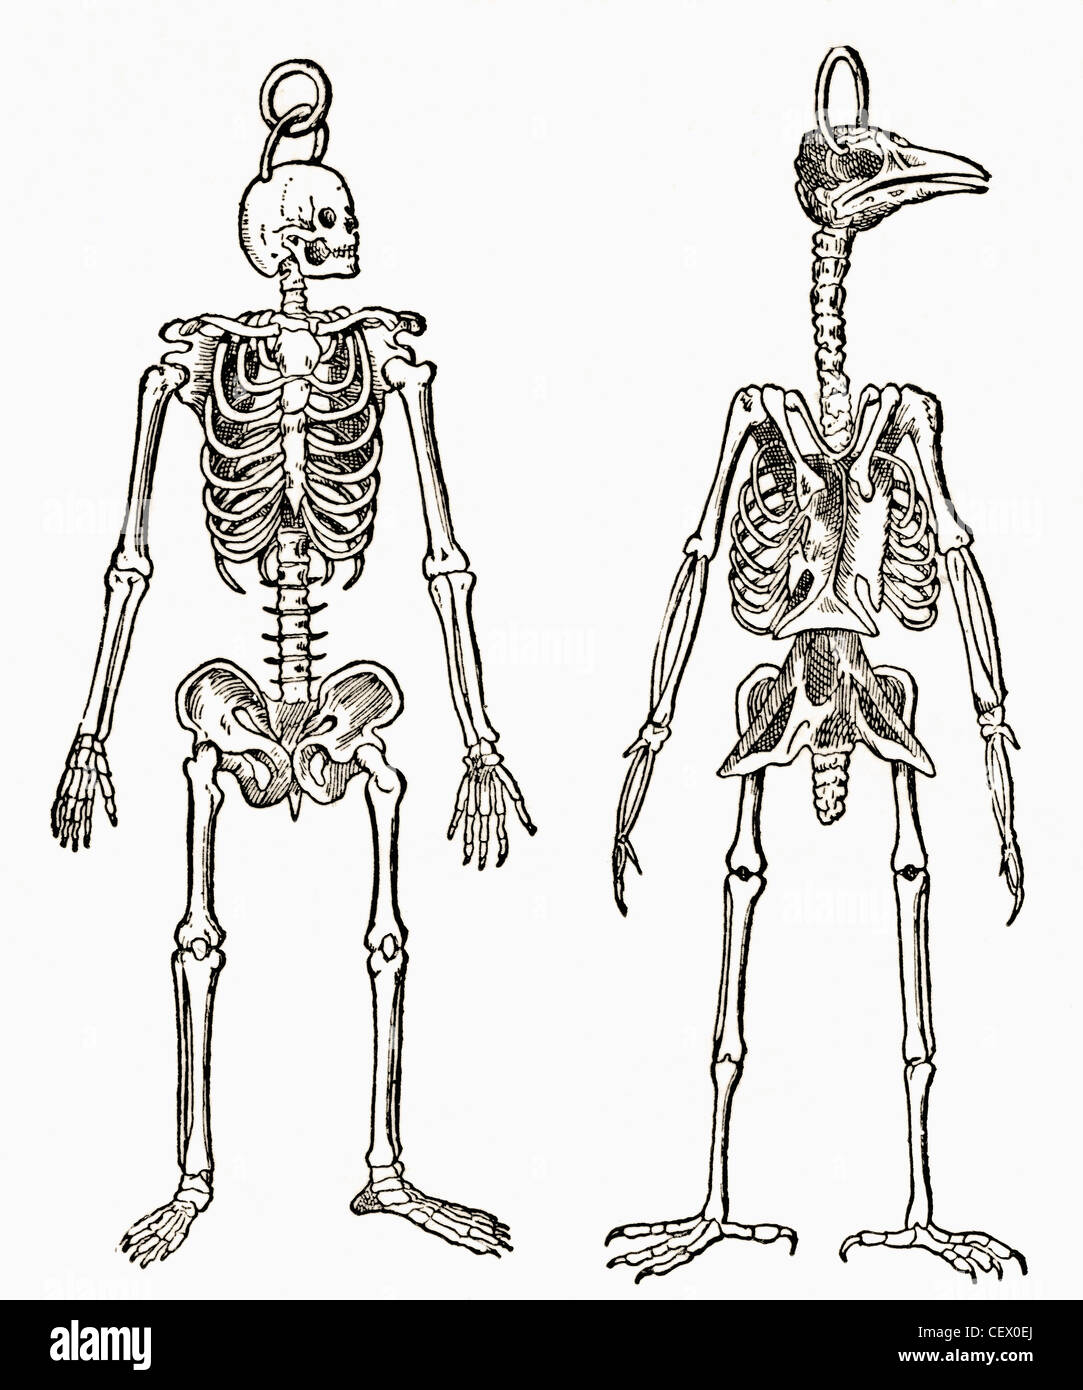 Skeletons of a man and a bird drawn to the same scale. From The Strand Magazine published 1897. Stock Photo